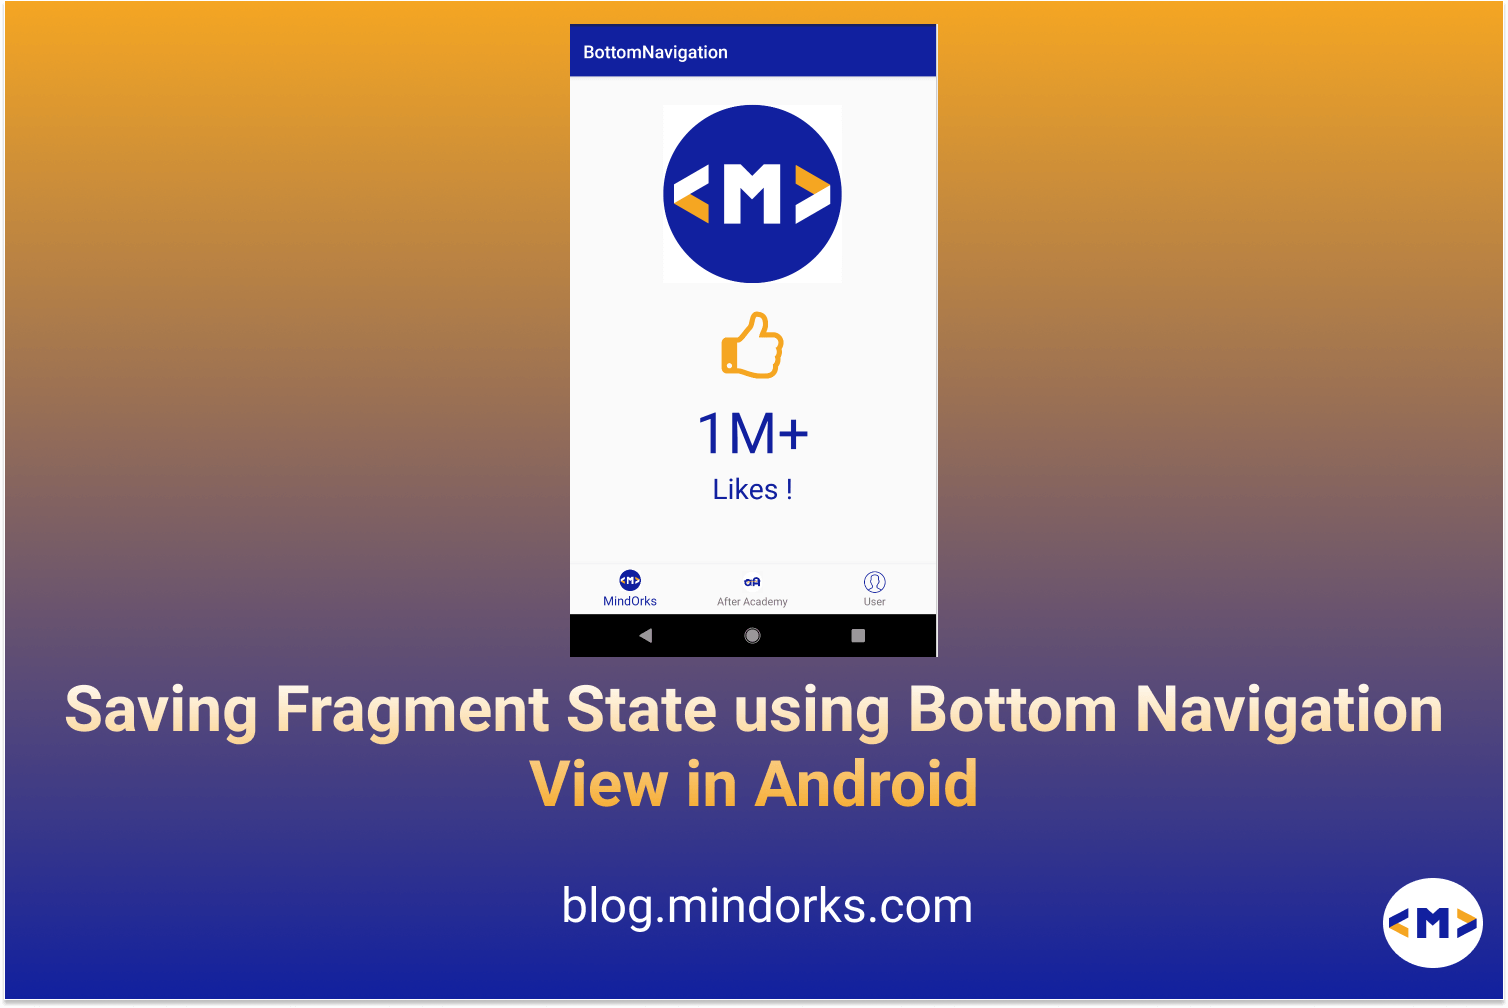 Saving Fragment States with BottomNavigationView